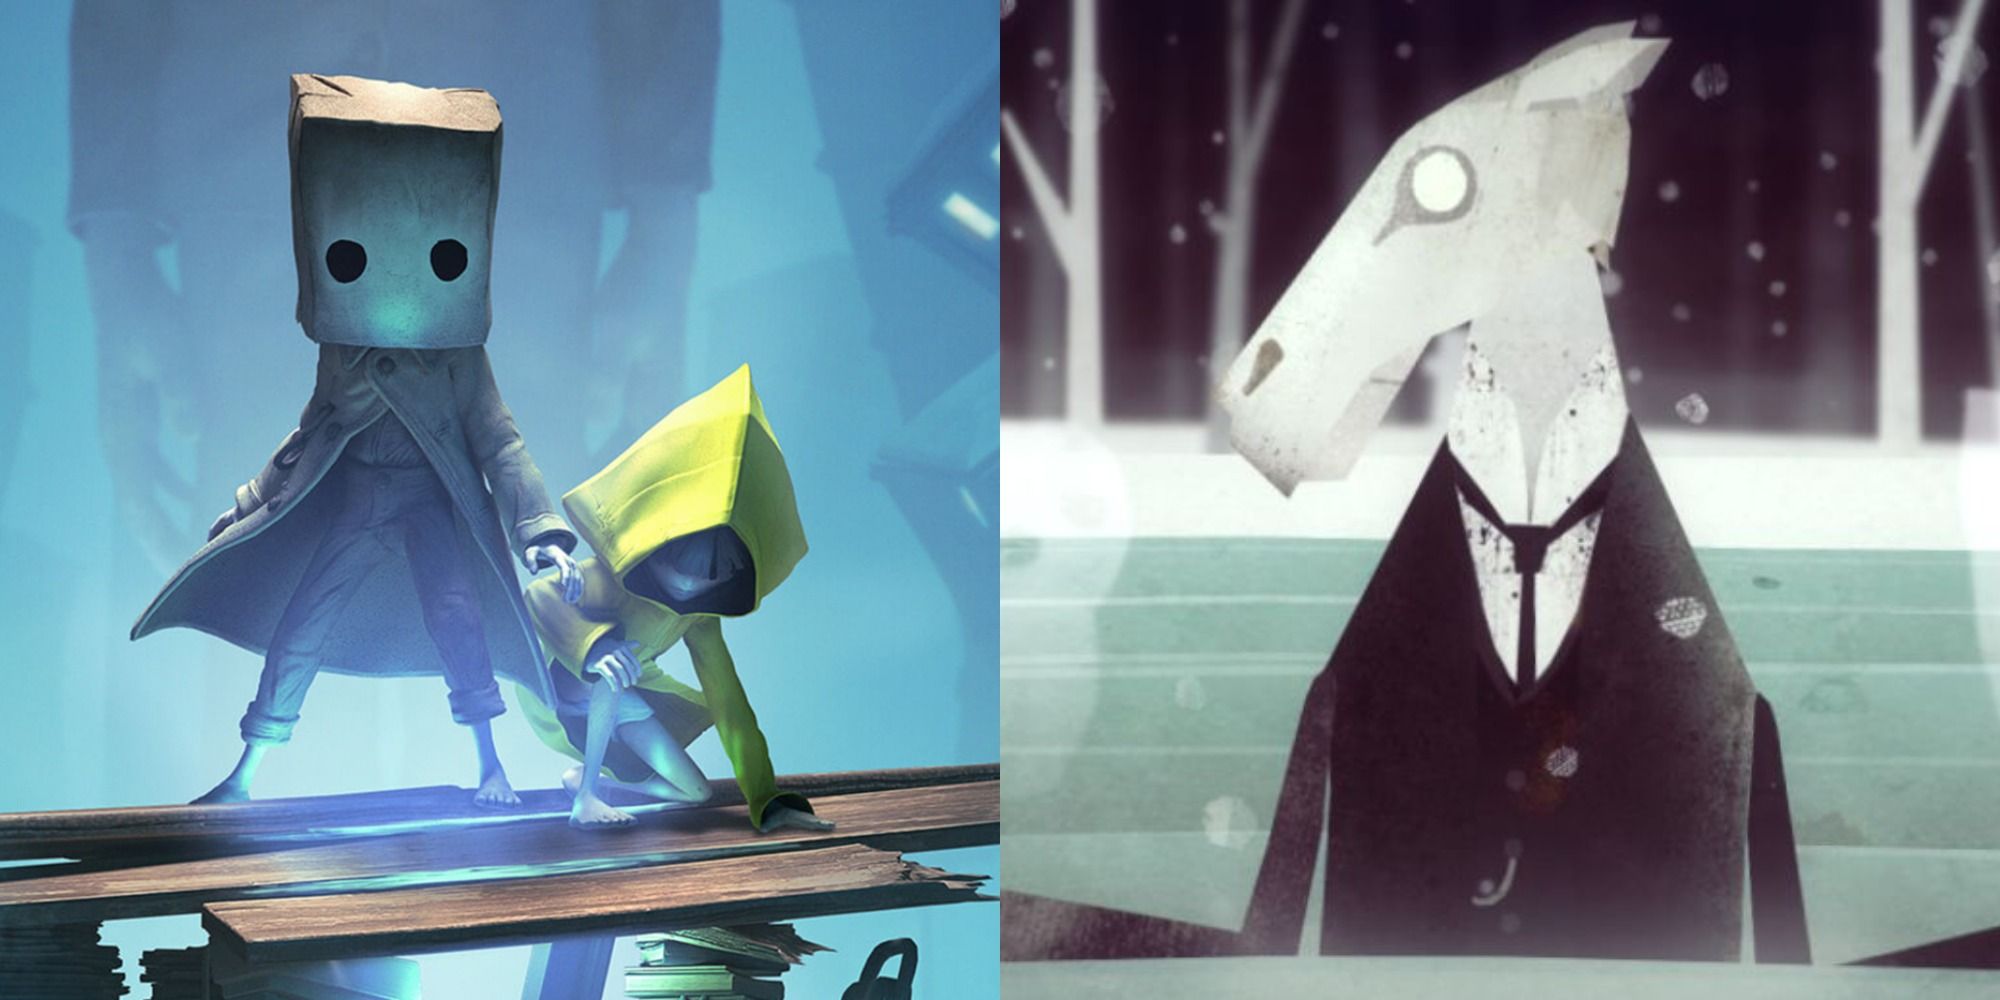 Split image showing artwork for the games Little Nightmares 2 and Year Walk